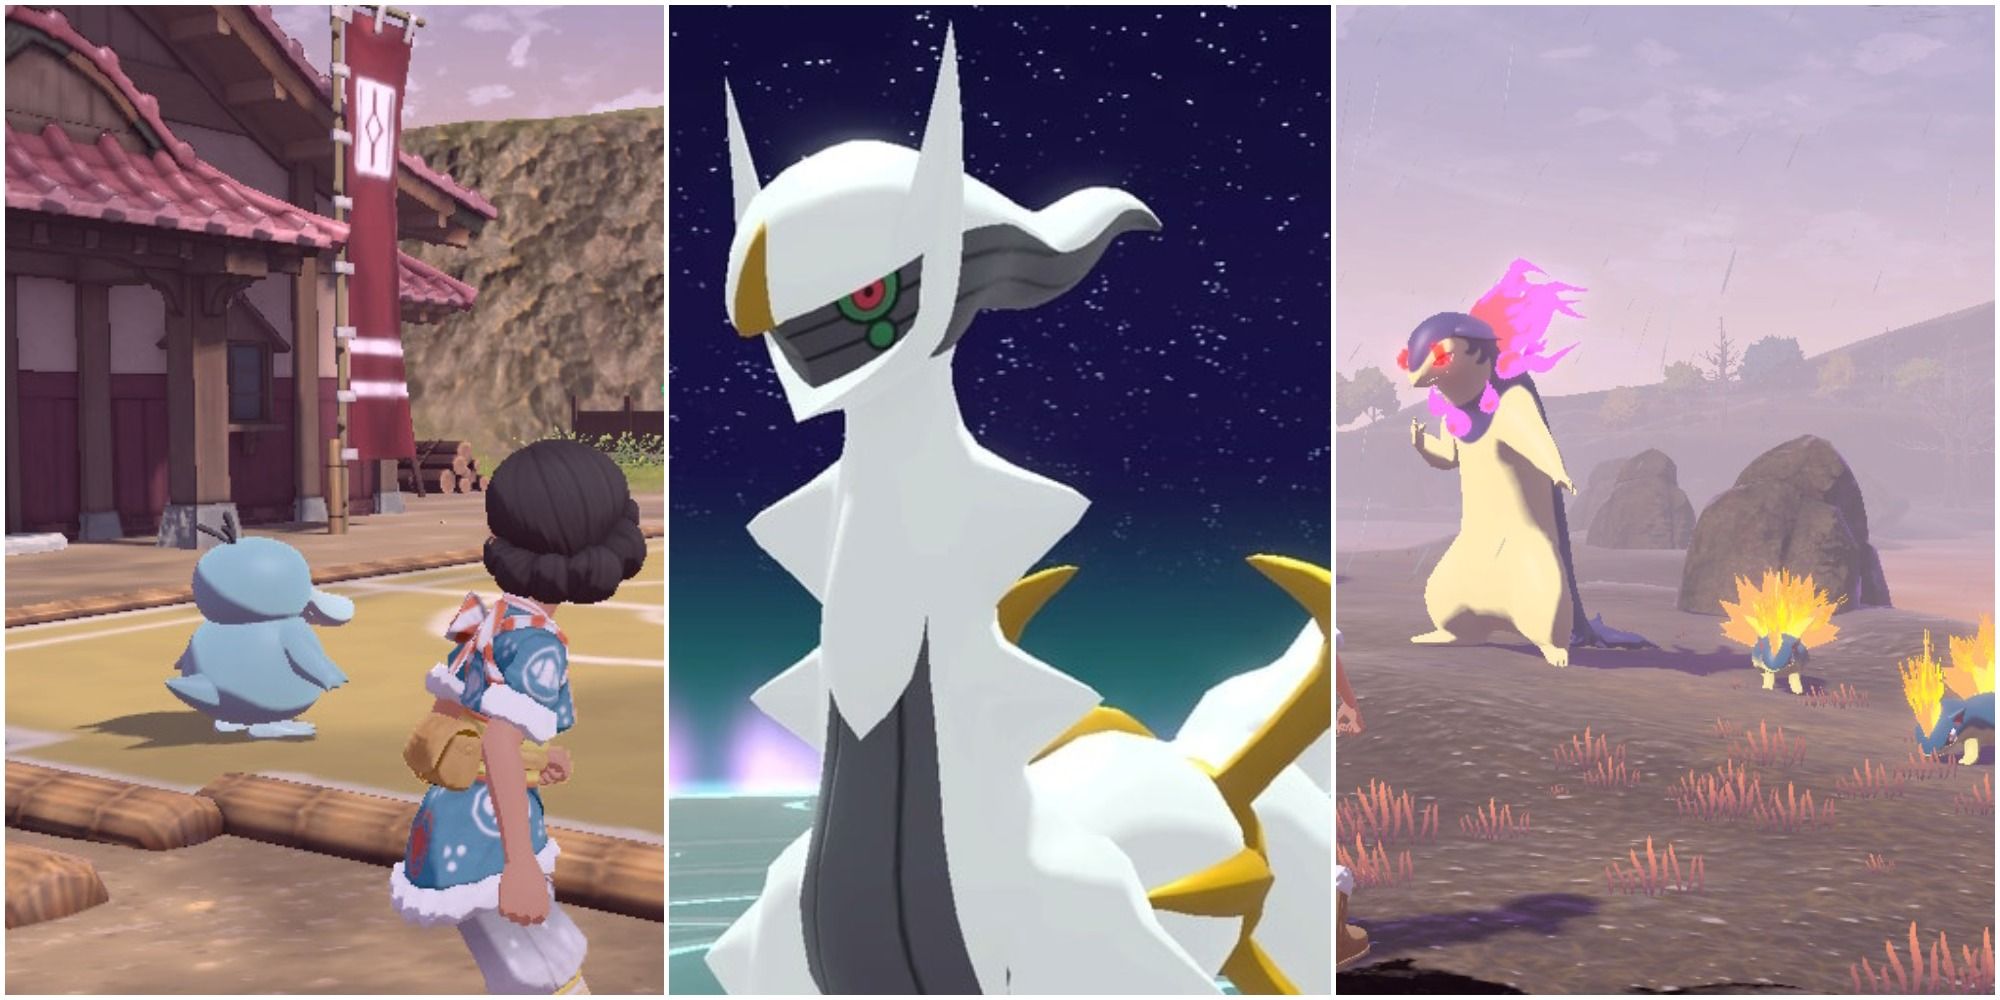 2022 Preview: Pokémon Legends Arceus may be the refresh the series needs